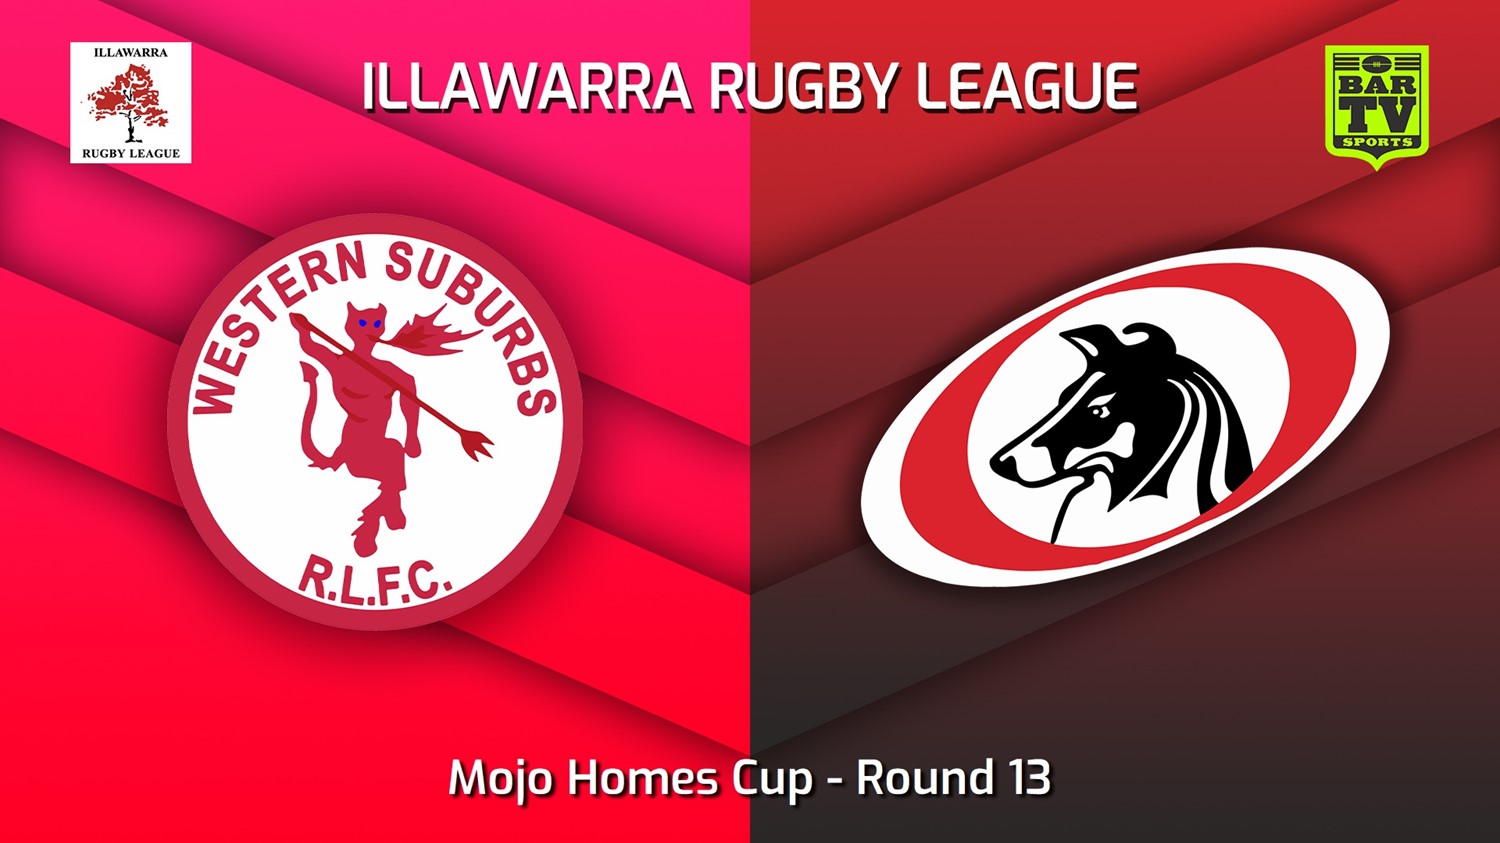 220806-Illawarra Round 13 - Mojo Homes Cup - Western Suburbs Devils v Collegians Minigame Slate Image